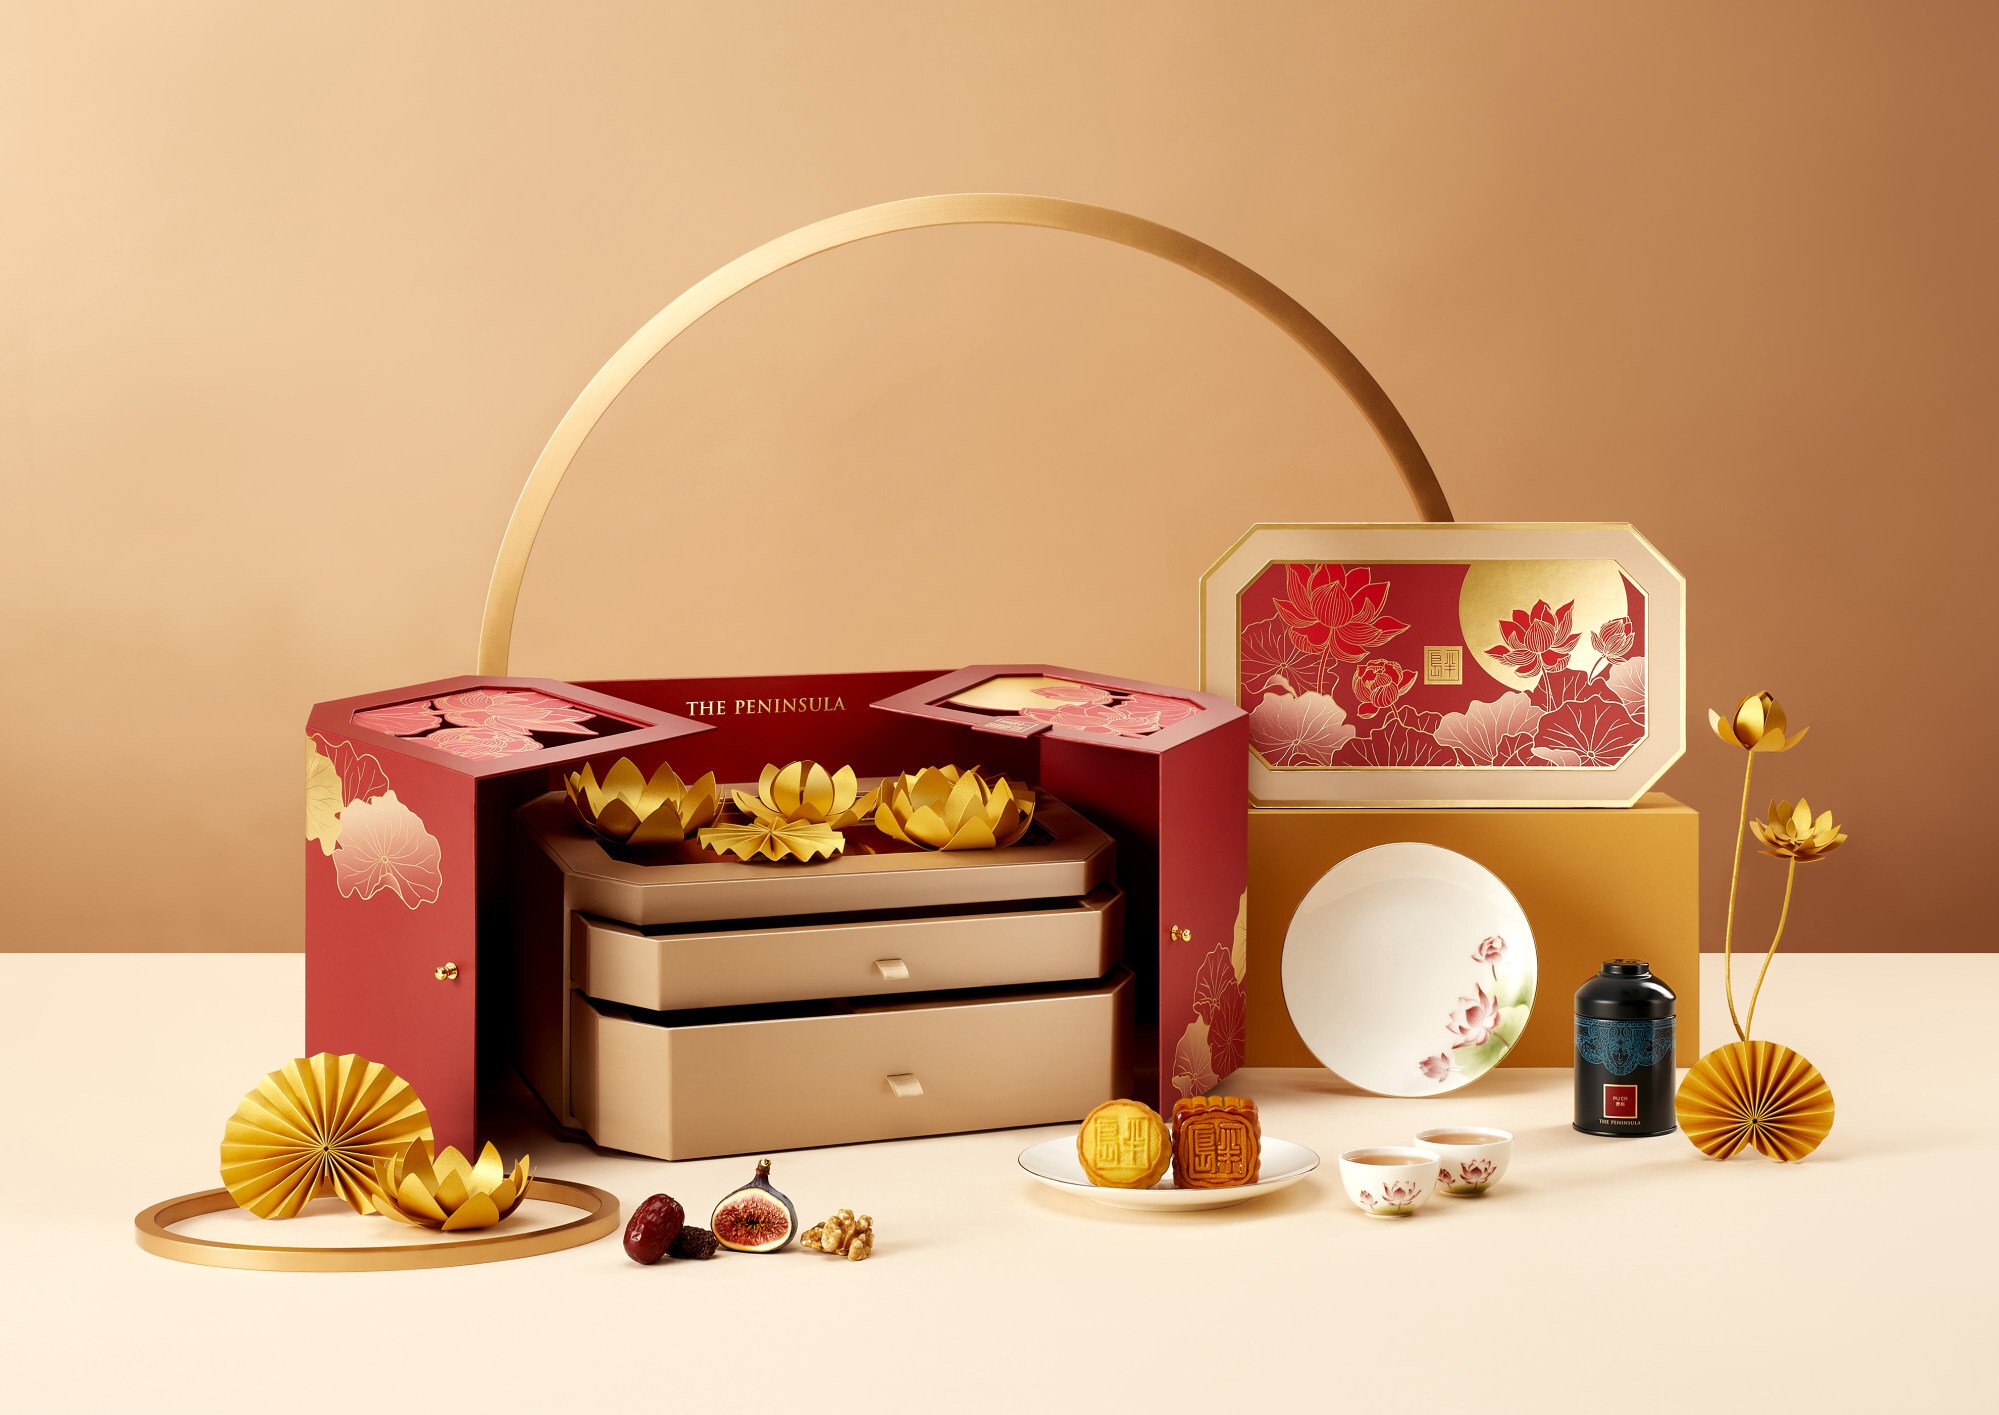 The prettiest mooncake packaging to double as Mid-Autumn 2020